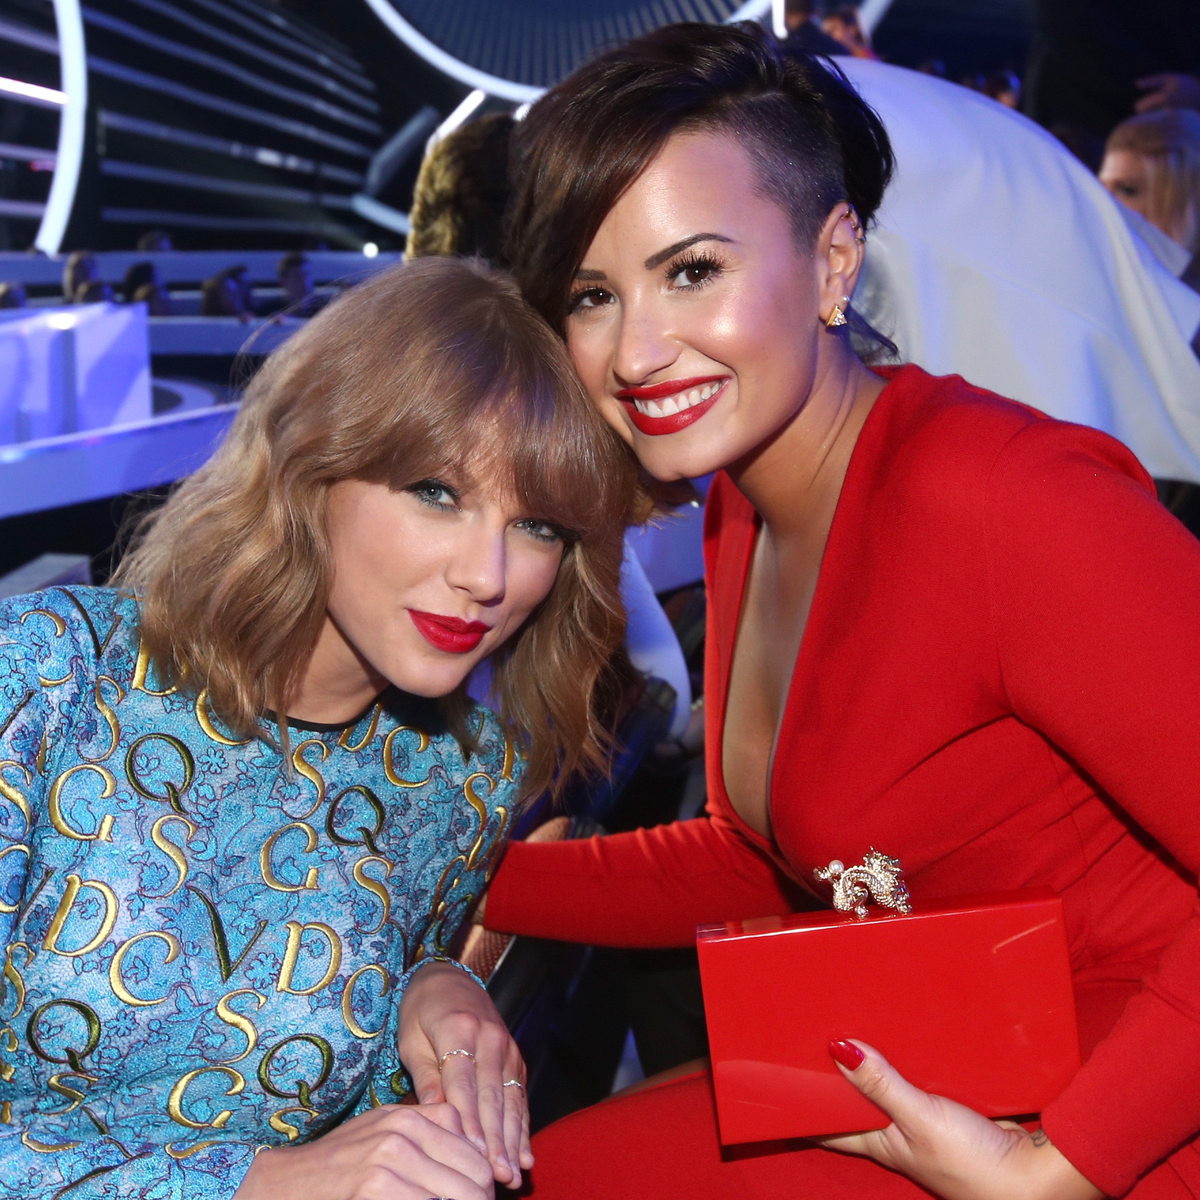 Demi Lovato and Taylor Swift Prove There’s No Bad Blood Between Them